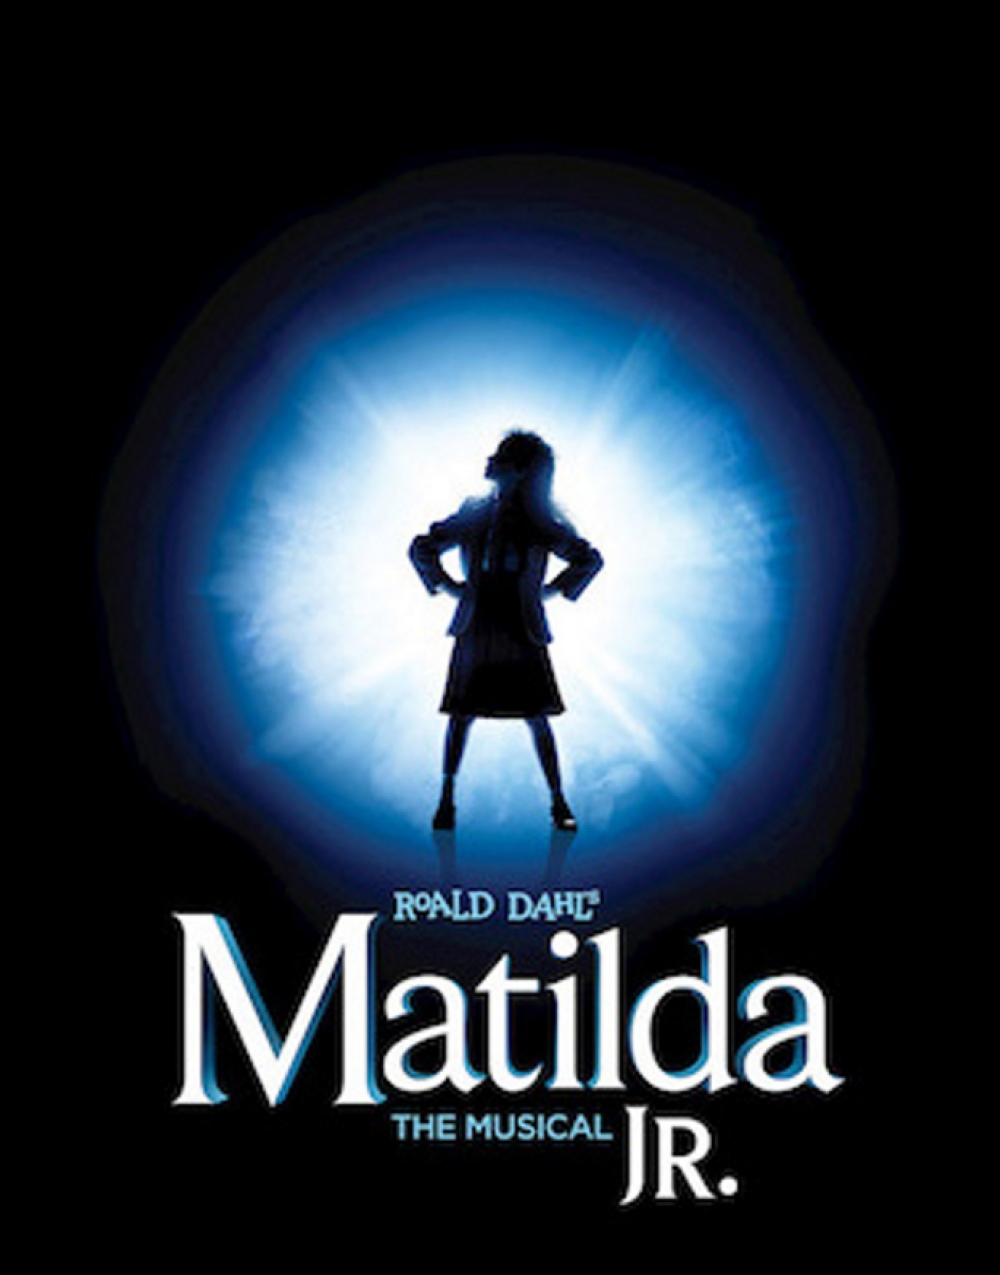 Roald Dahl's Matilda The Musical JR. - Zane Trace Theater Stage Mag